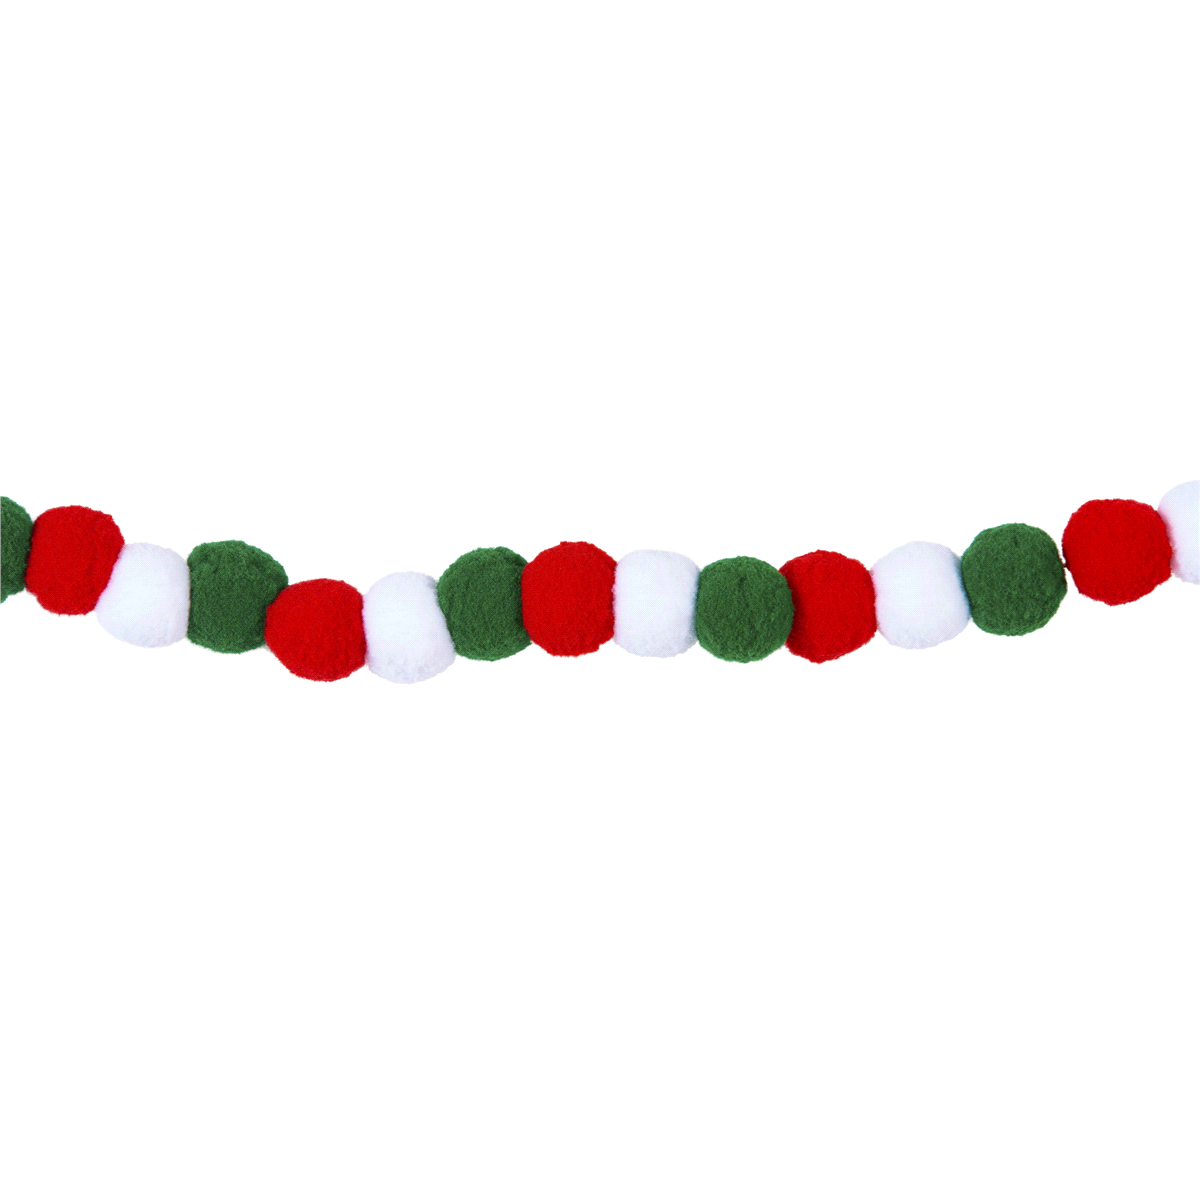 Papyrus Holiday Pom Poms Banner Red White Green 79 inch